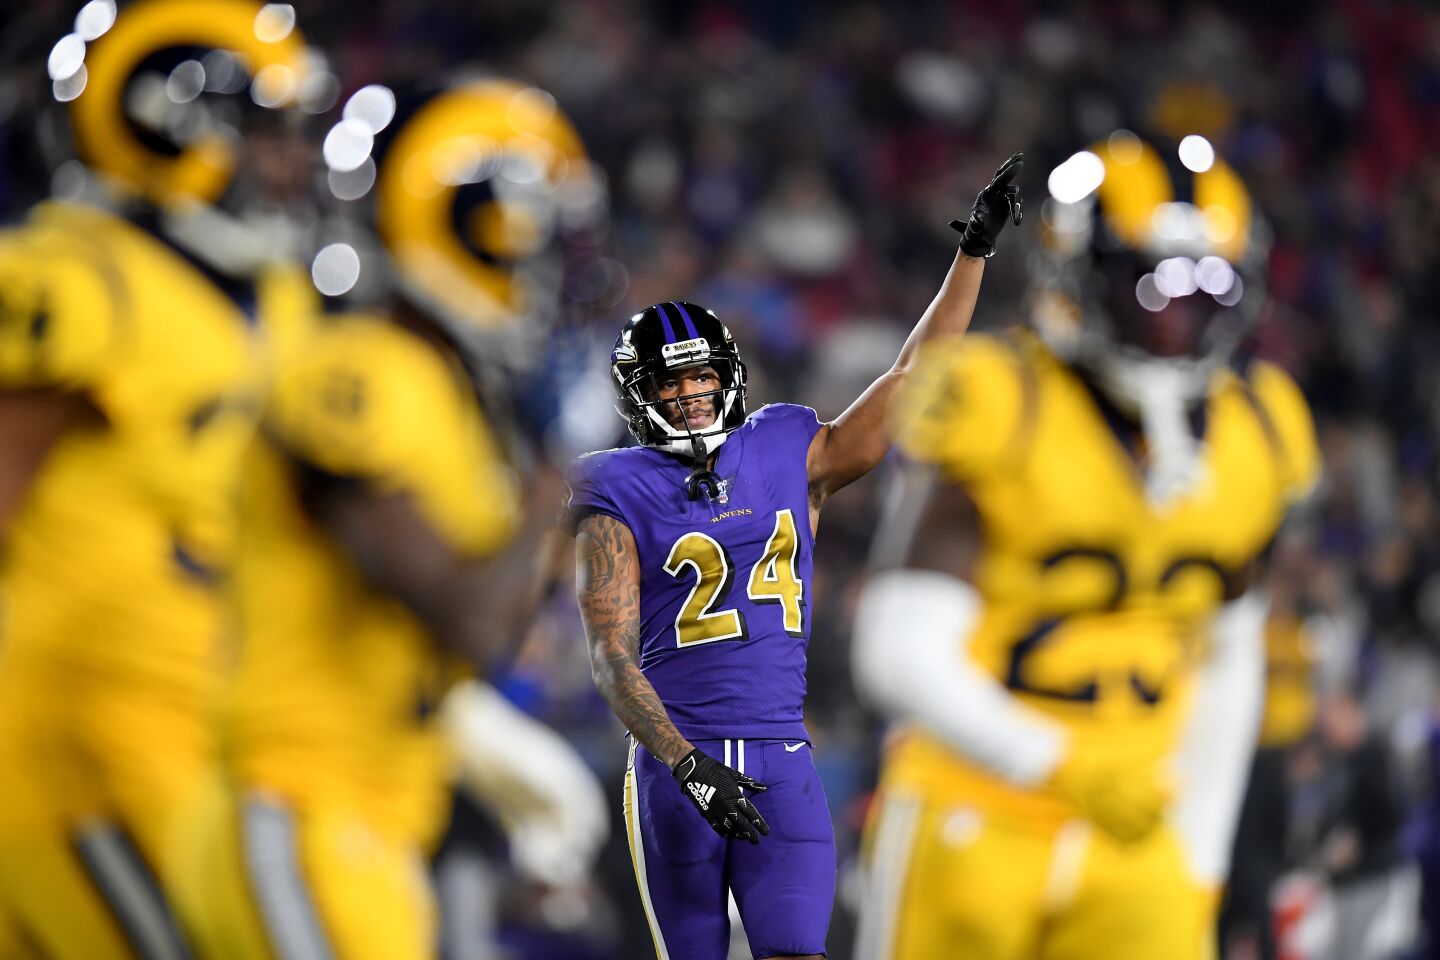 Ravens cornerback Marcus Peters taunts his former team as the Rams come off the field during the fourth quarter of a game Nov. 25 at the Coliseum.